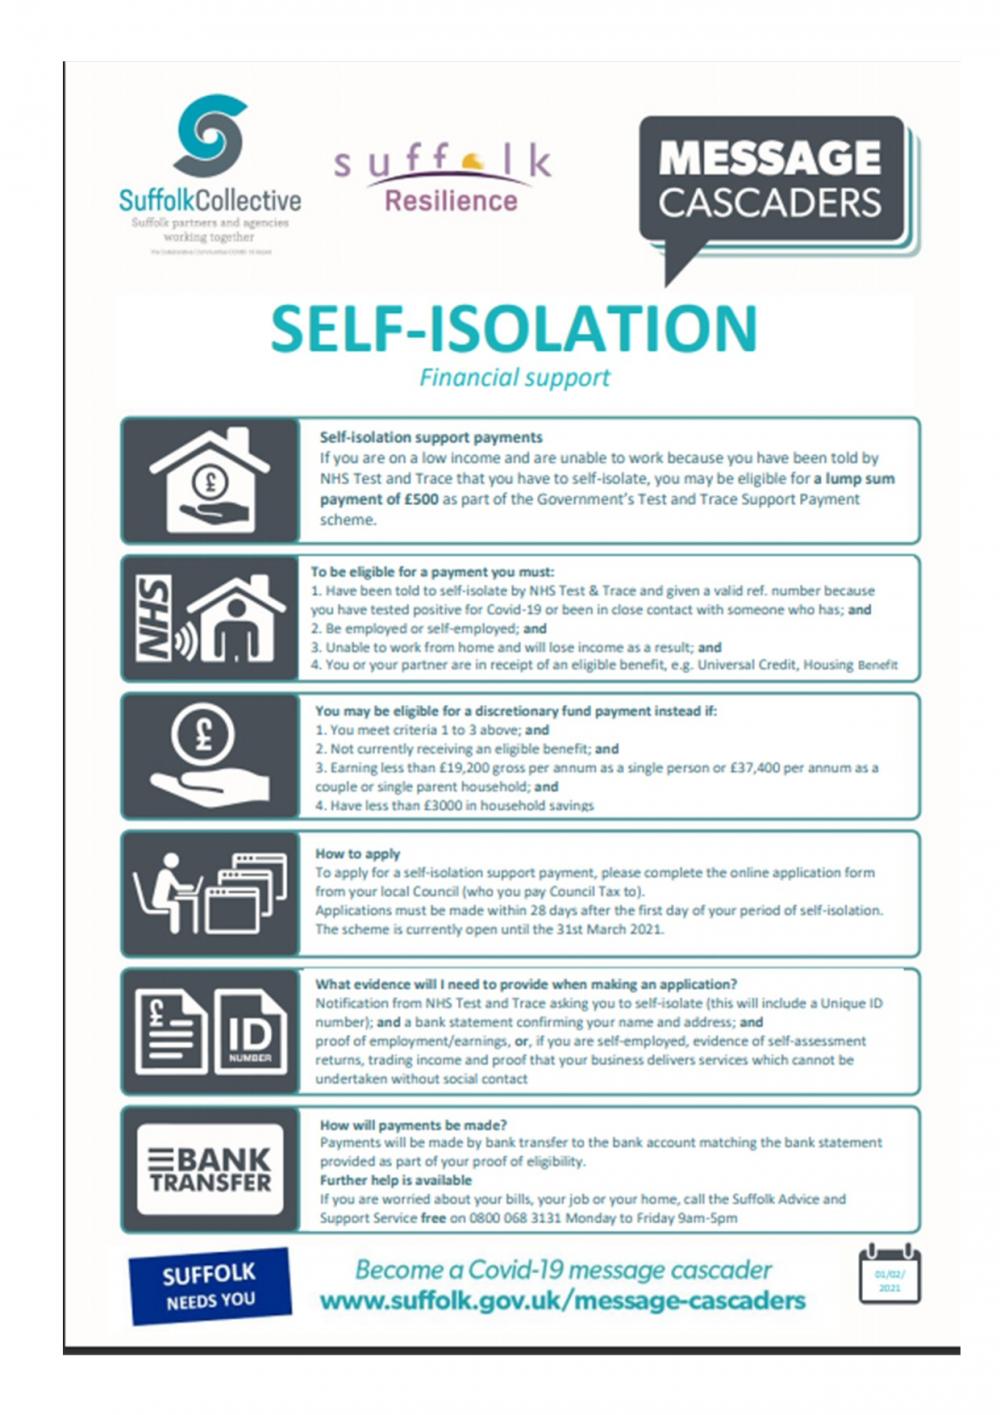 2021 01 02 Self isolation financial support infographic English